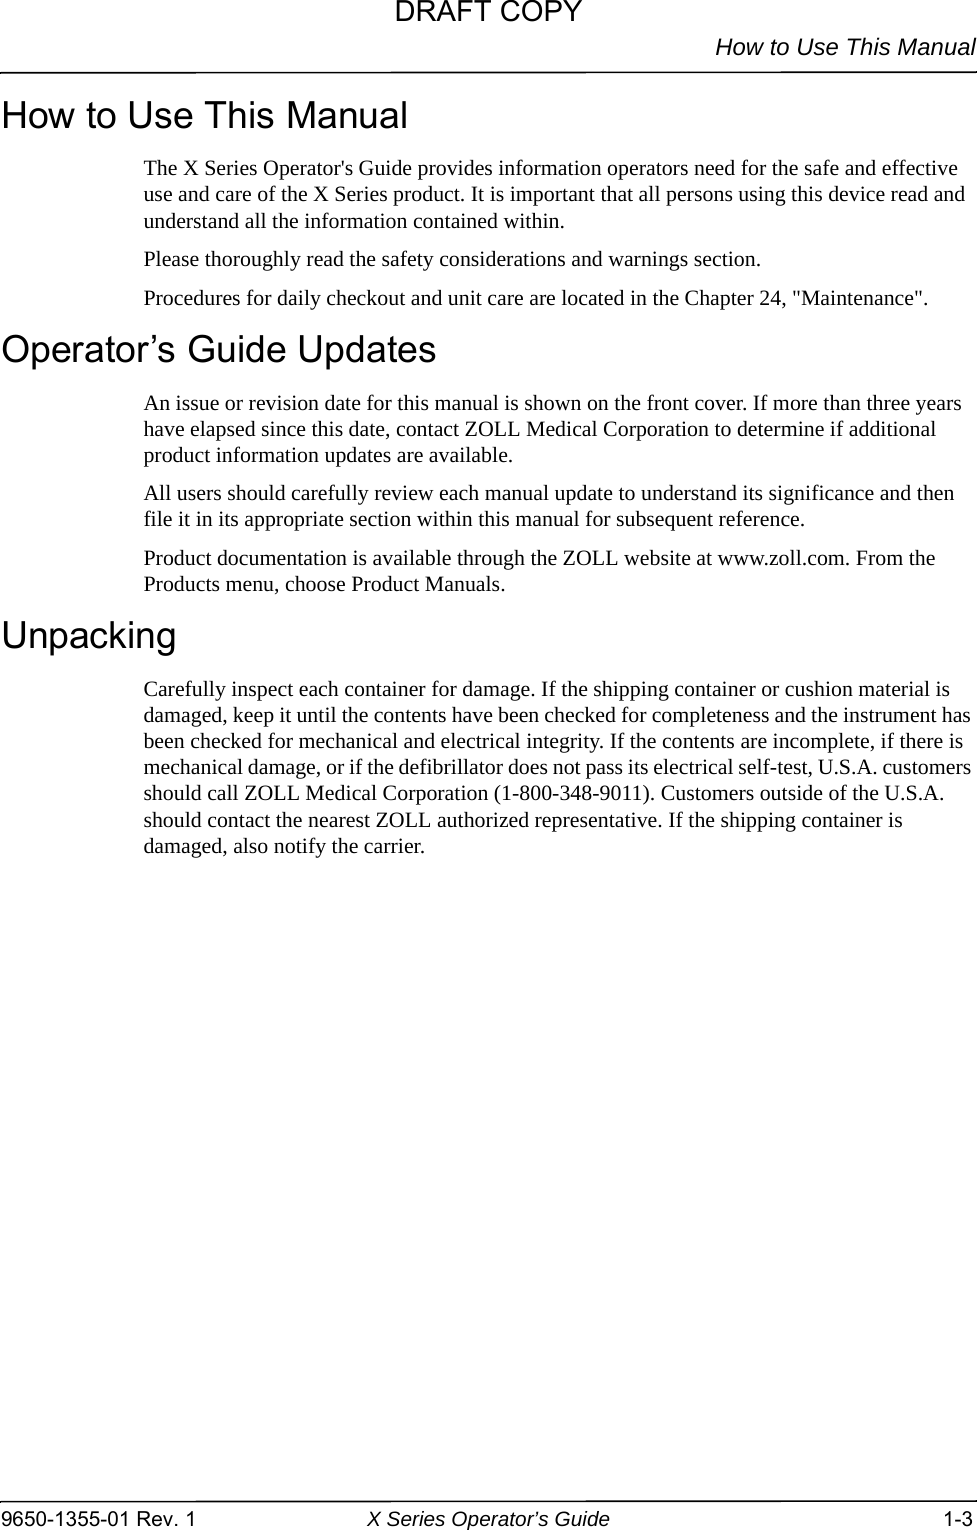 How to Use This Manual9650-1355-01 Rev. 1 X Series Operator’s Guide 1-3How to Use This ManualThe X Series Operator&apos;s Guide provides information operators need for the safe and effective use and care of the X Series product. It is important that all persons using this device read and understand all the information contained within.Please thoroughly read the safety considerations and warnings section.Procedures for daily checkout and unit care are located in the Chapter 24, &quot;Maintenance&quot;.Operator’s Guide UpdatesAn issue or revision date for this manual is shown on the front cover. If more than three years have elapsed since this date, contact ZOLL Medical Corporation to determine if additional product information updates are available.All users should carefully review each manual update to understand its significance and then file it in its appropriate section within this manual for subsequent reference.Product documentation is available through the ZOLL website at www.zoll.com. From the Products menu, choose Product Manuals.UnpackingCarefully inspect each container for damage. If the shipping container or cushion material is damaged, keep it until the contents have been checked for completeness and the instrument has been checked for mechanical and electrical integrity. If the contents are incomplete, if there is mechanical damage, or if the defibrillator does not pass its electrical self-test, U.S.A. customers should call ZOLL Medical Corporation (1-800-348-9011). Customers outside of the U.S.A. should contact the nearest ZOLL authorized representative. If the shipping container is damaged, also notify the carrier.DRAFT COPY